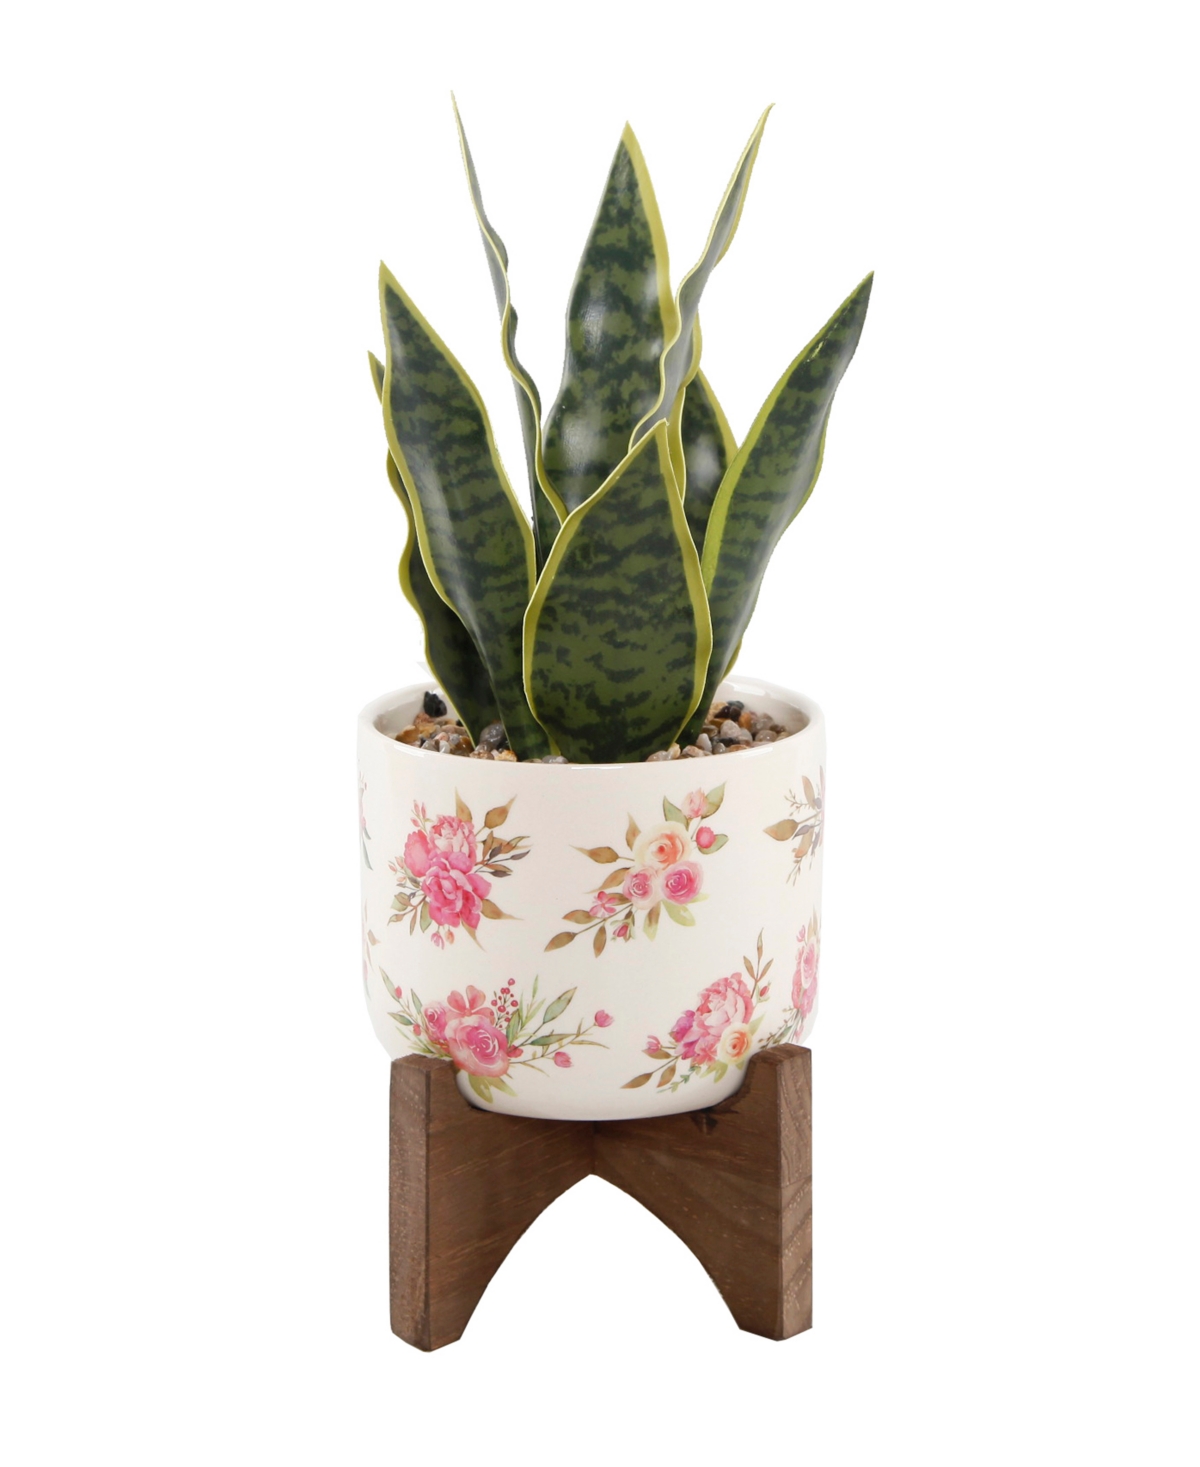 12" Snake Plant in Ceramic on Stand - White